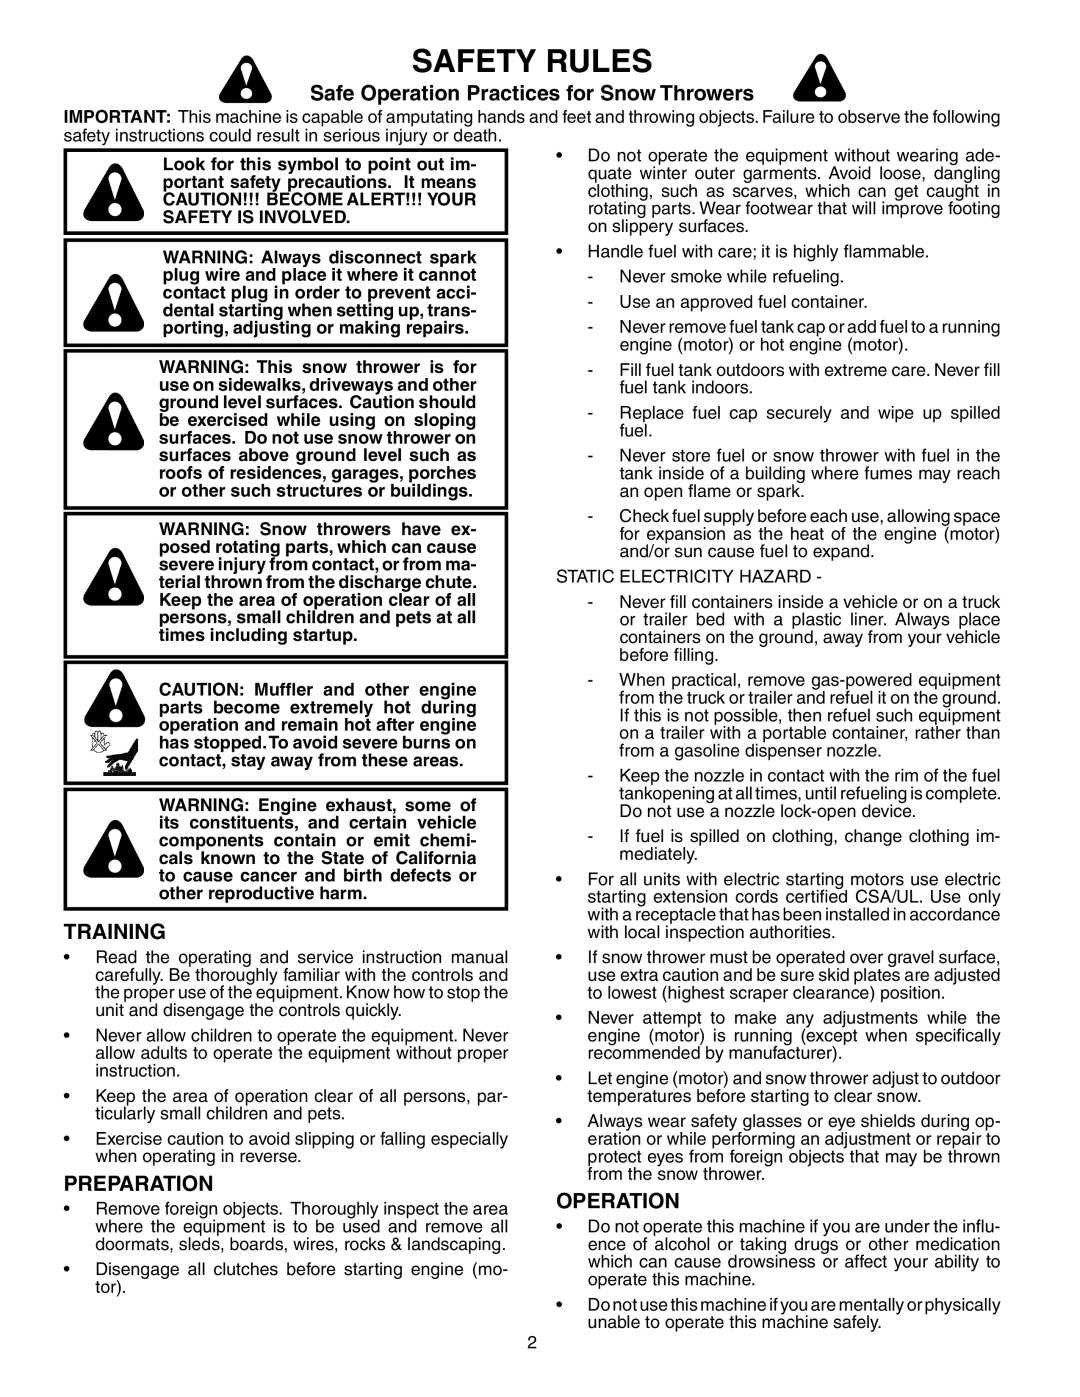 Husqvarna 1130STE XP owner manual Safety Rules, Safe Operation Practices for Snow Throwers, Training, Preparation 